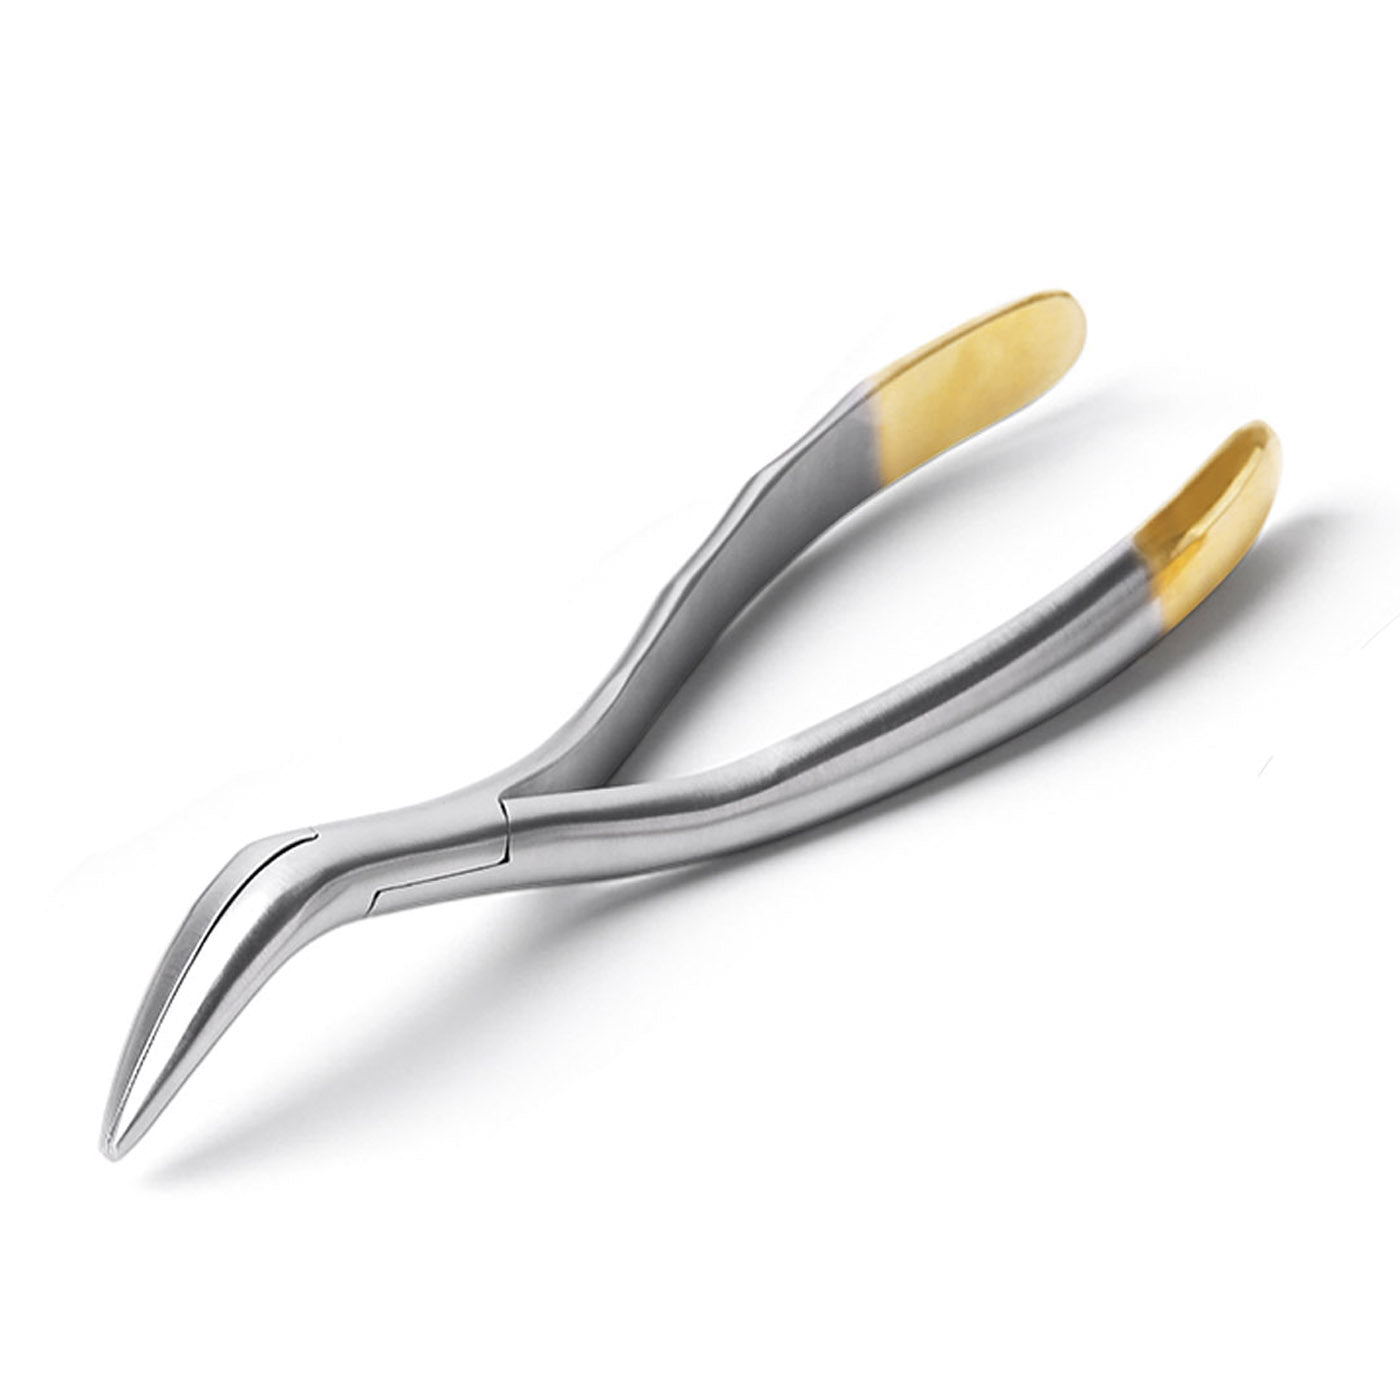 Dental Root Fragment Minimally Invasive Tooth Extraction Forceps Pliers #1 Maxillary Teeth Root   - pairaydental.com